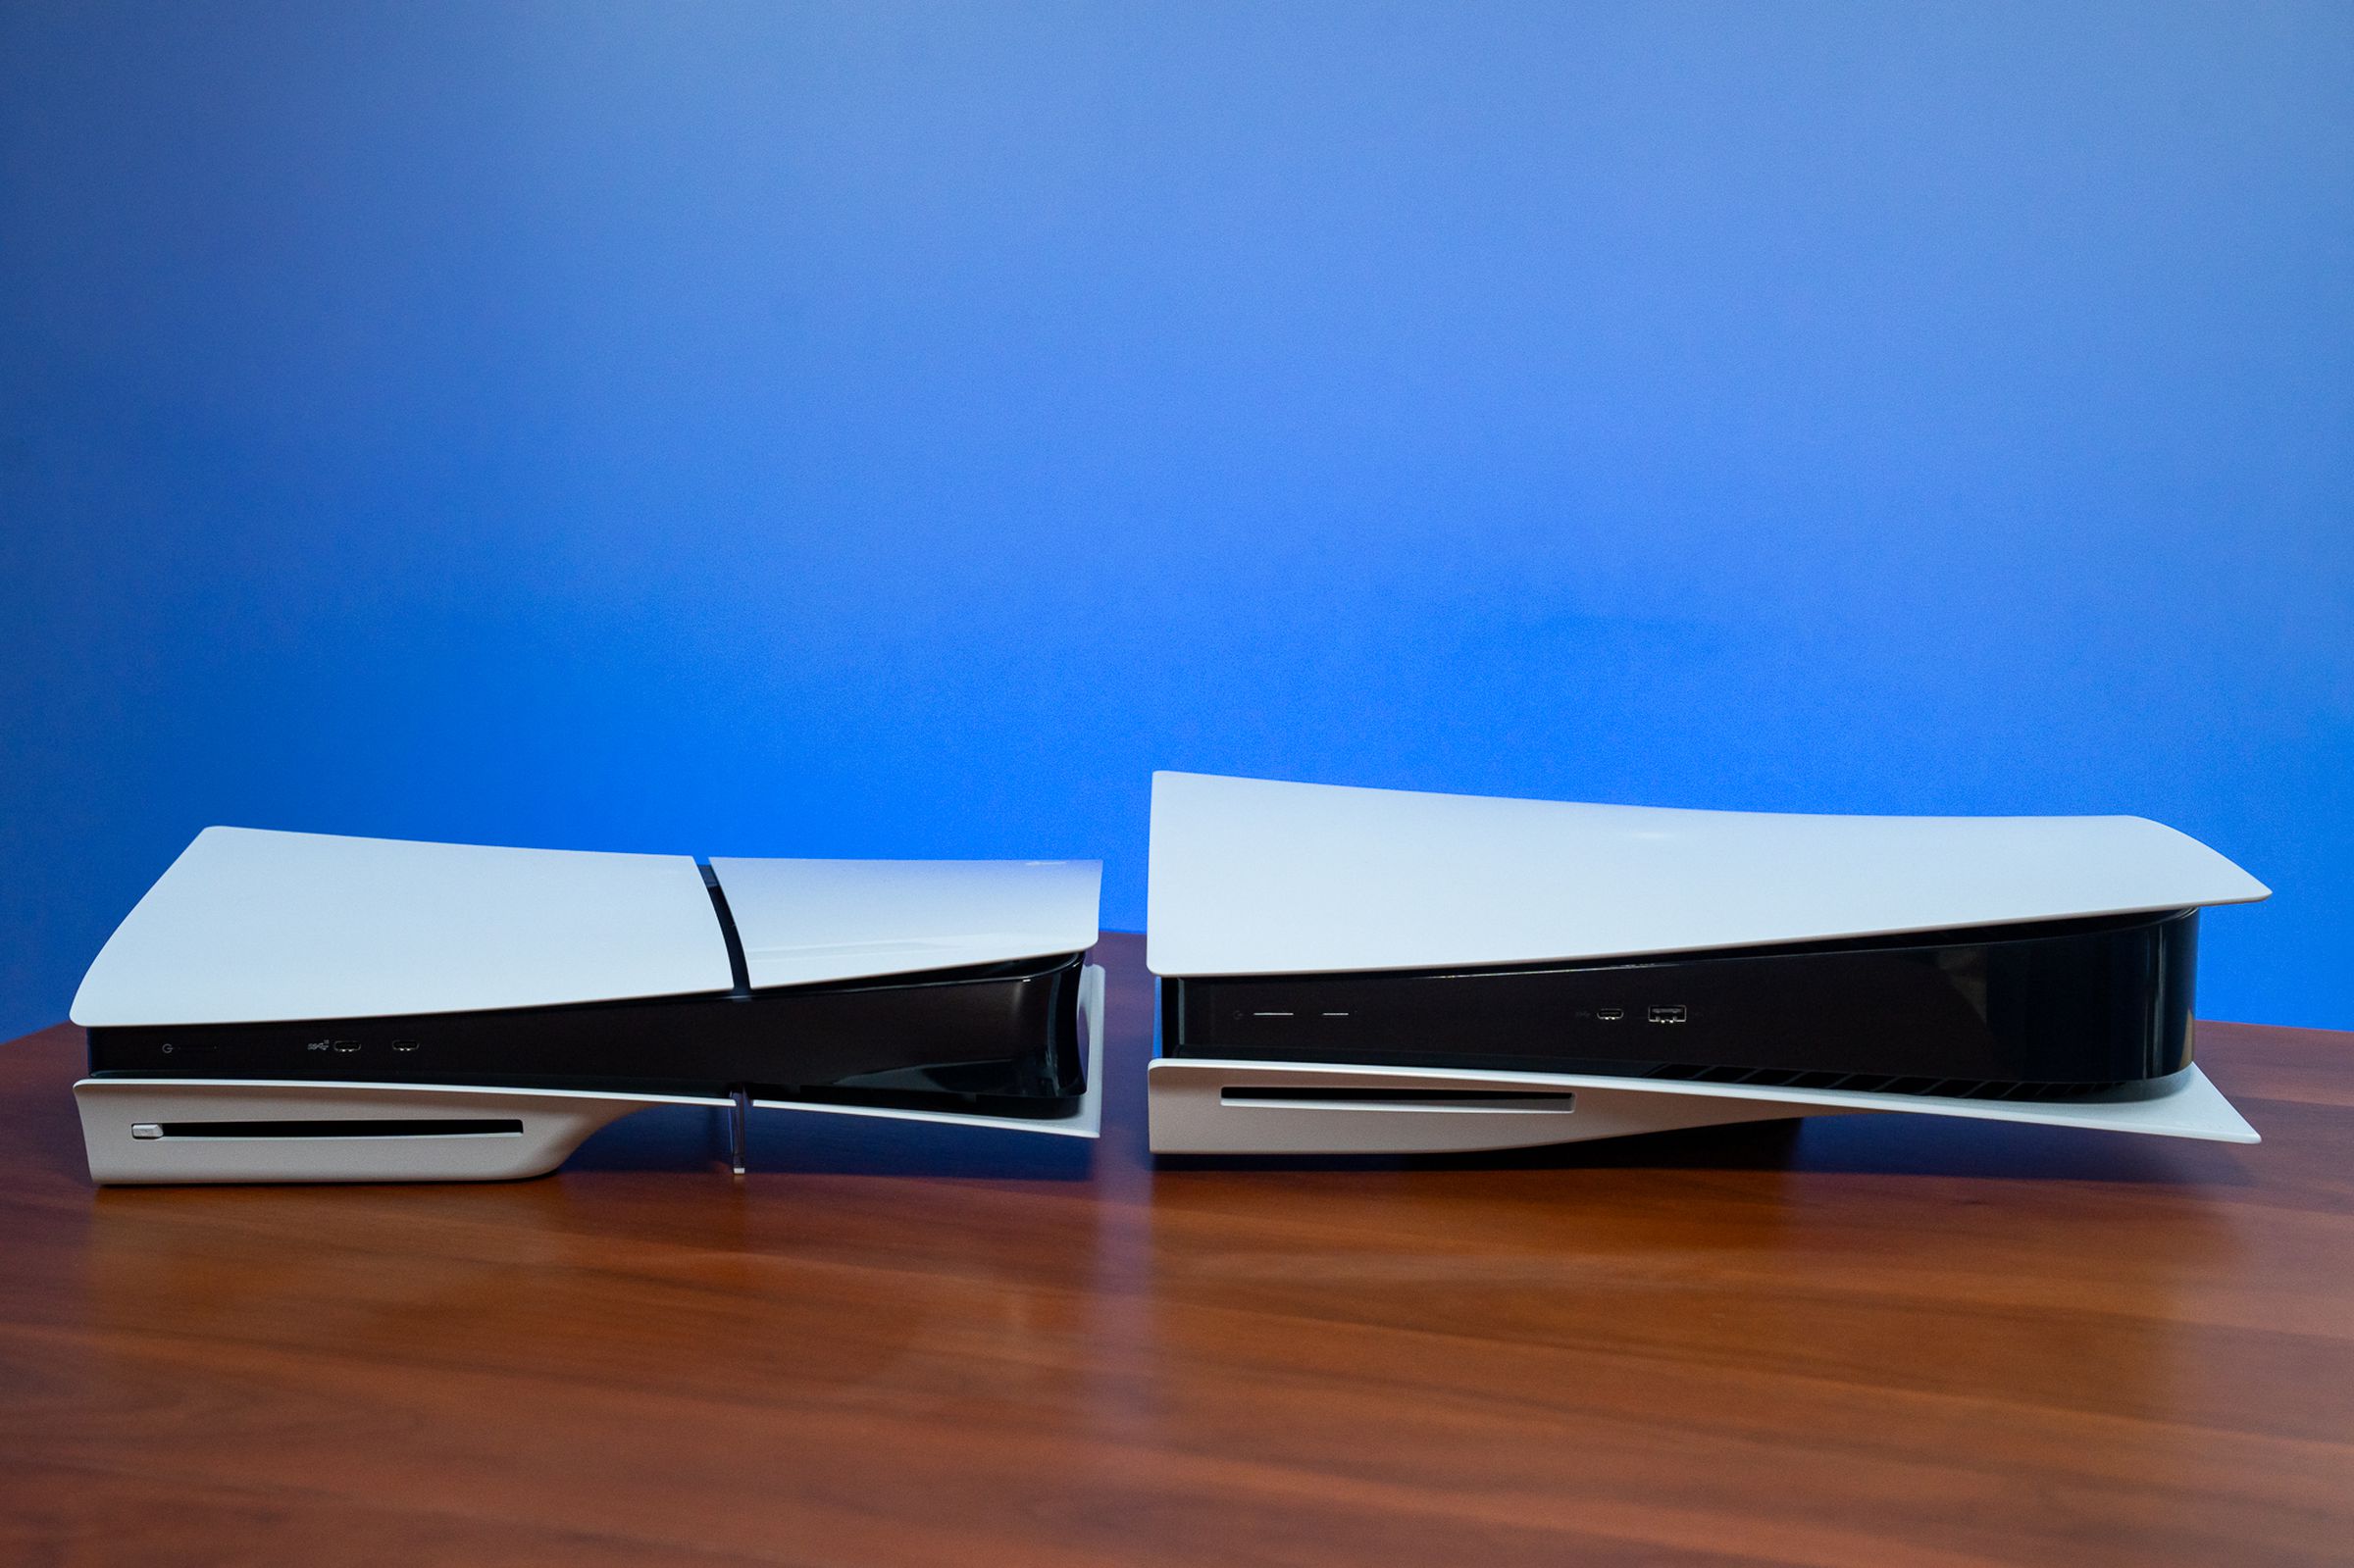 <em>Unlike the original PS5, the disc version of the new model actually rests on its side cover.</em>